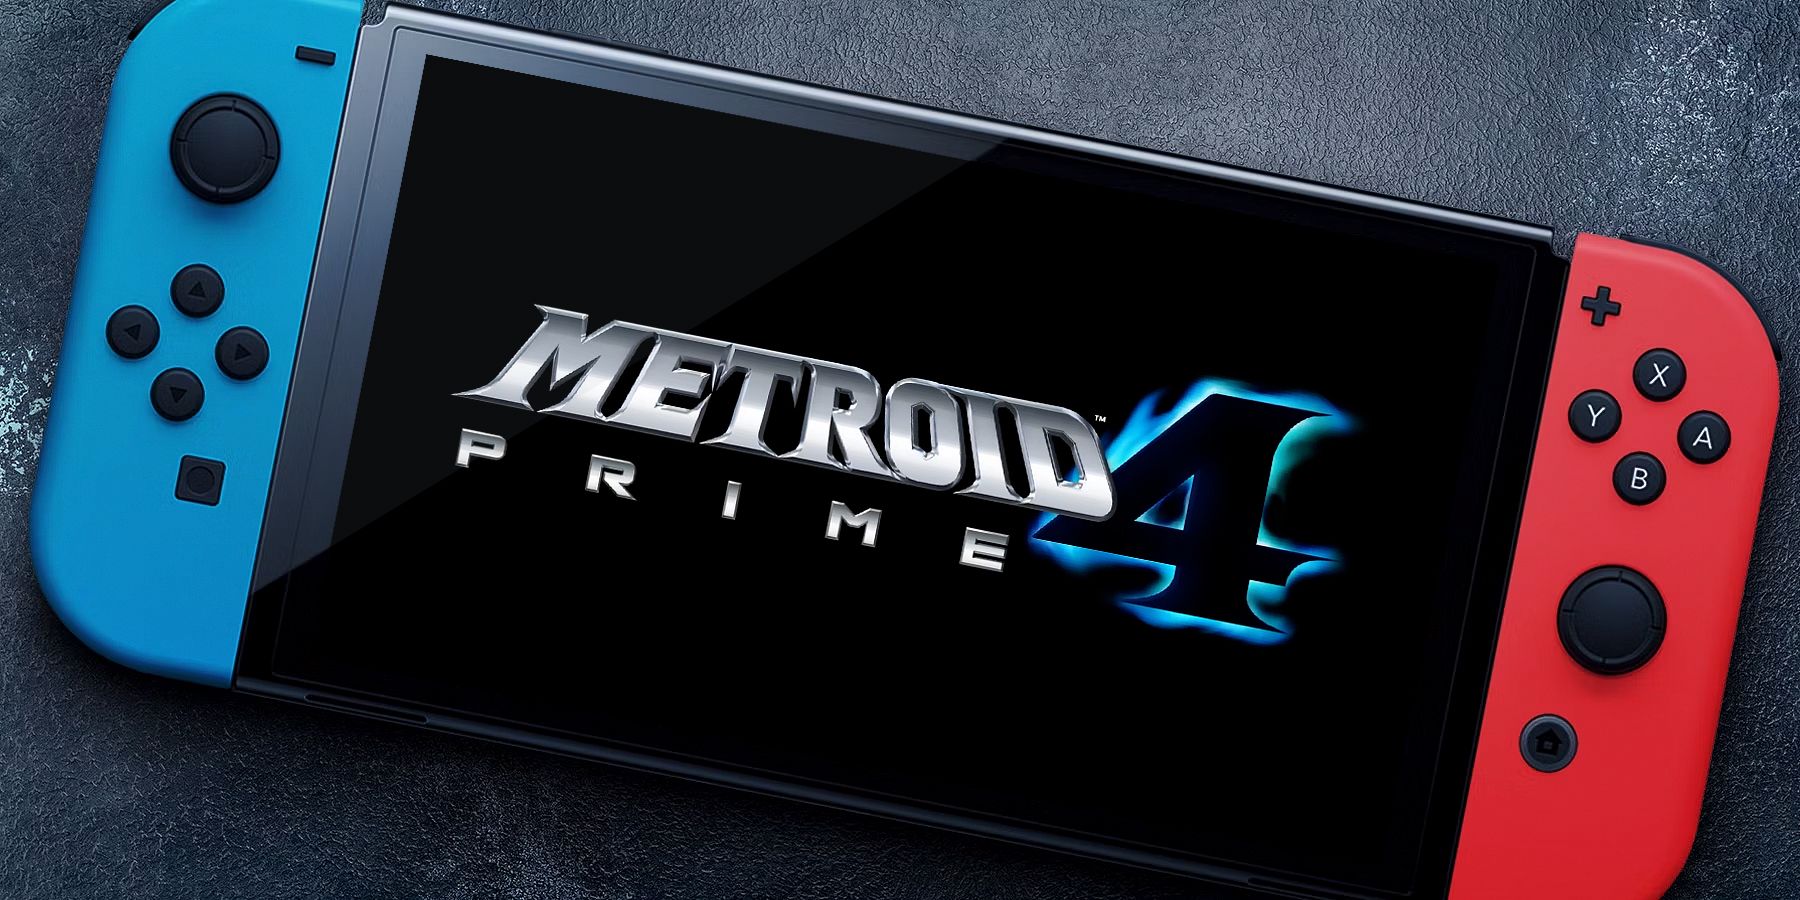 Nintendo Switch console with Metroid Prime 4 logo on the screen